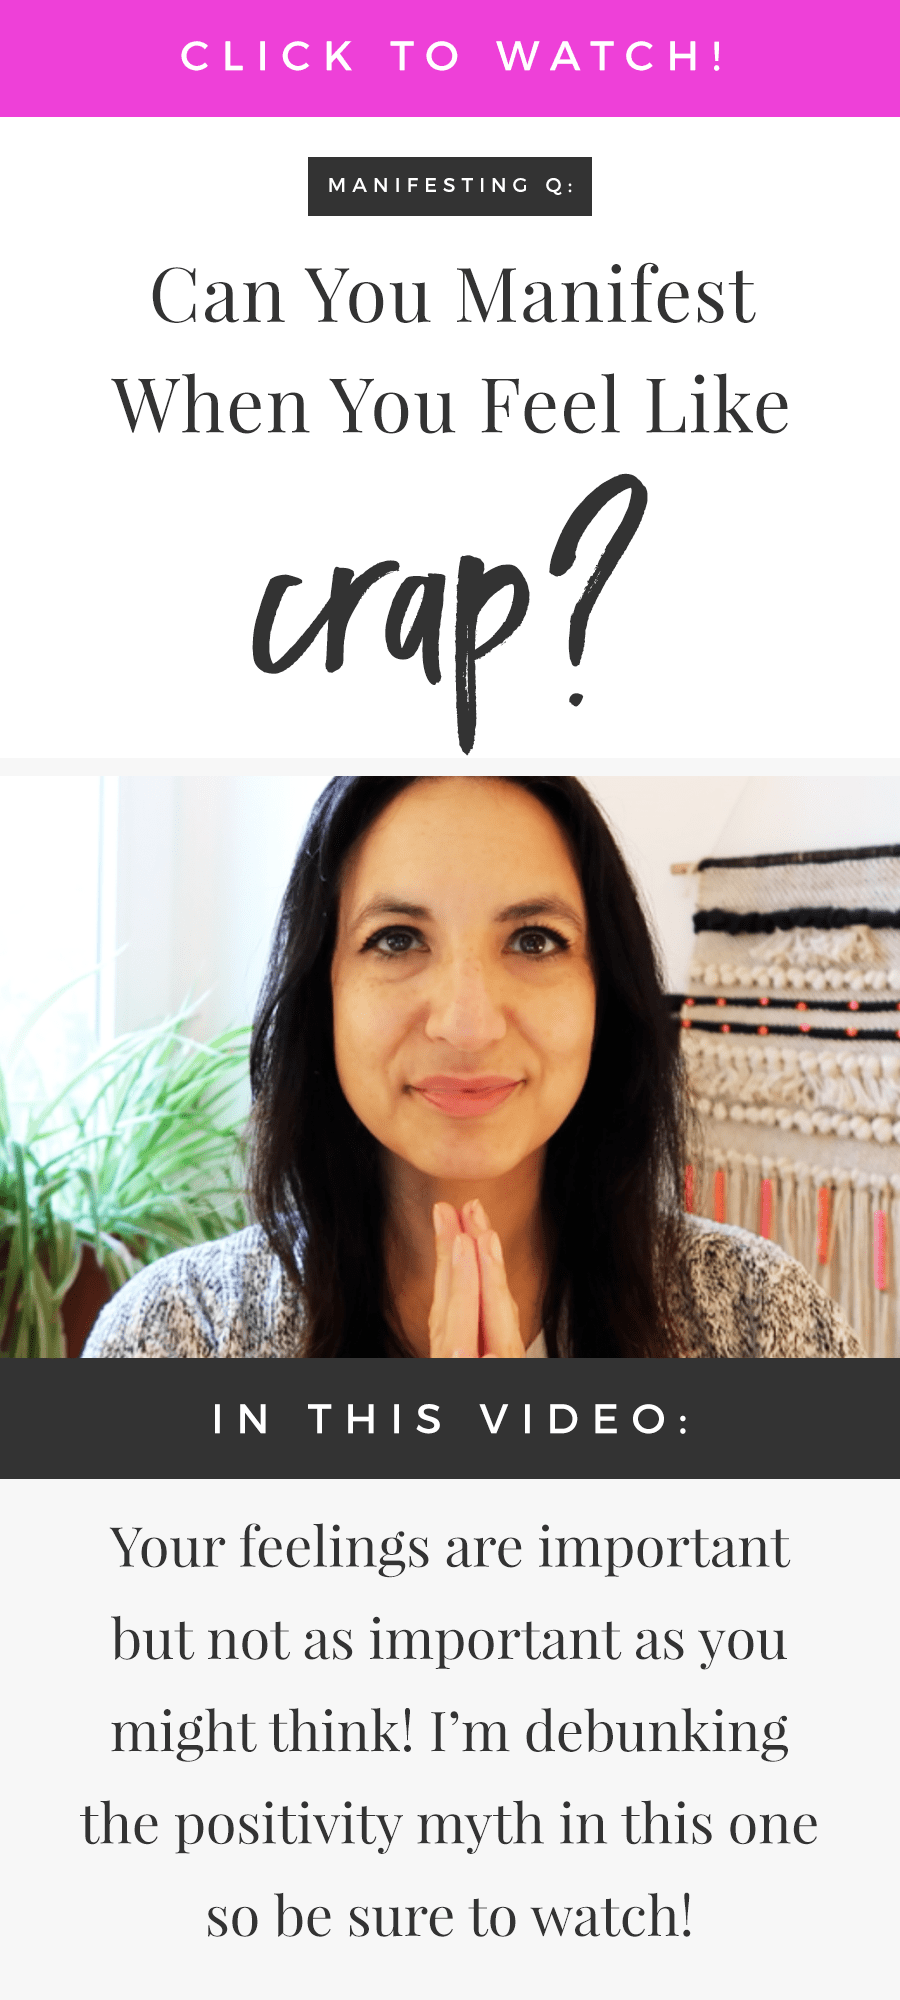 Can You Manifest When You Feel Like Crap?